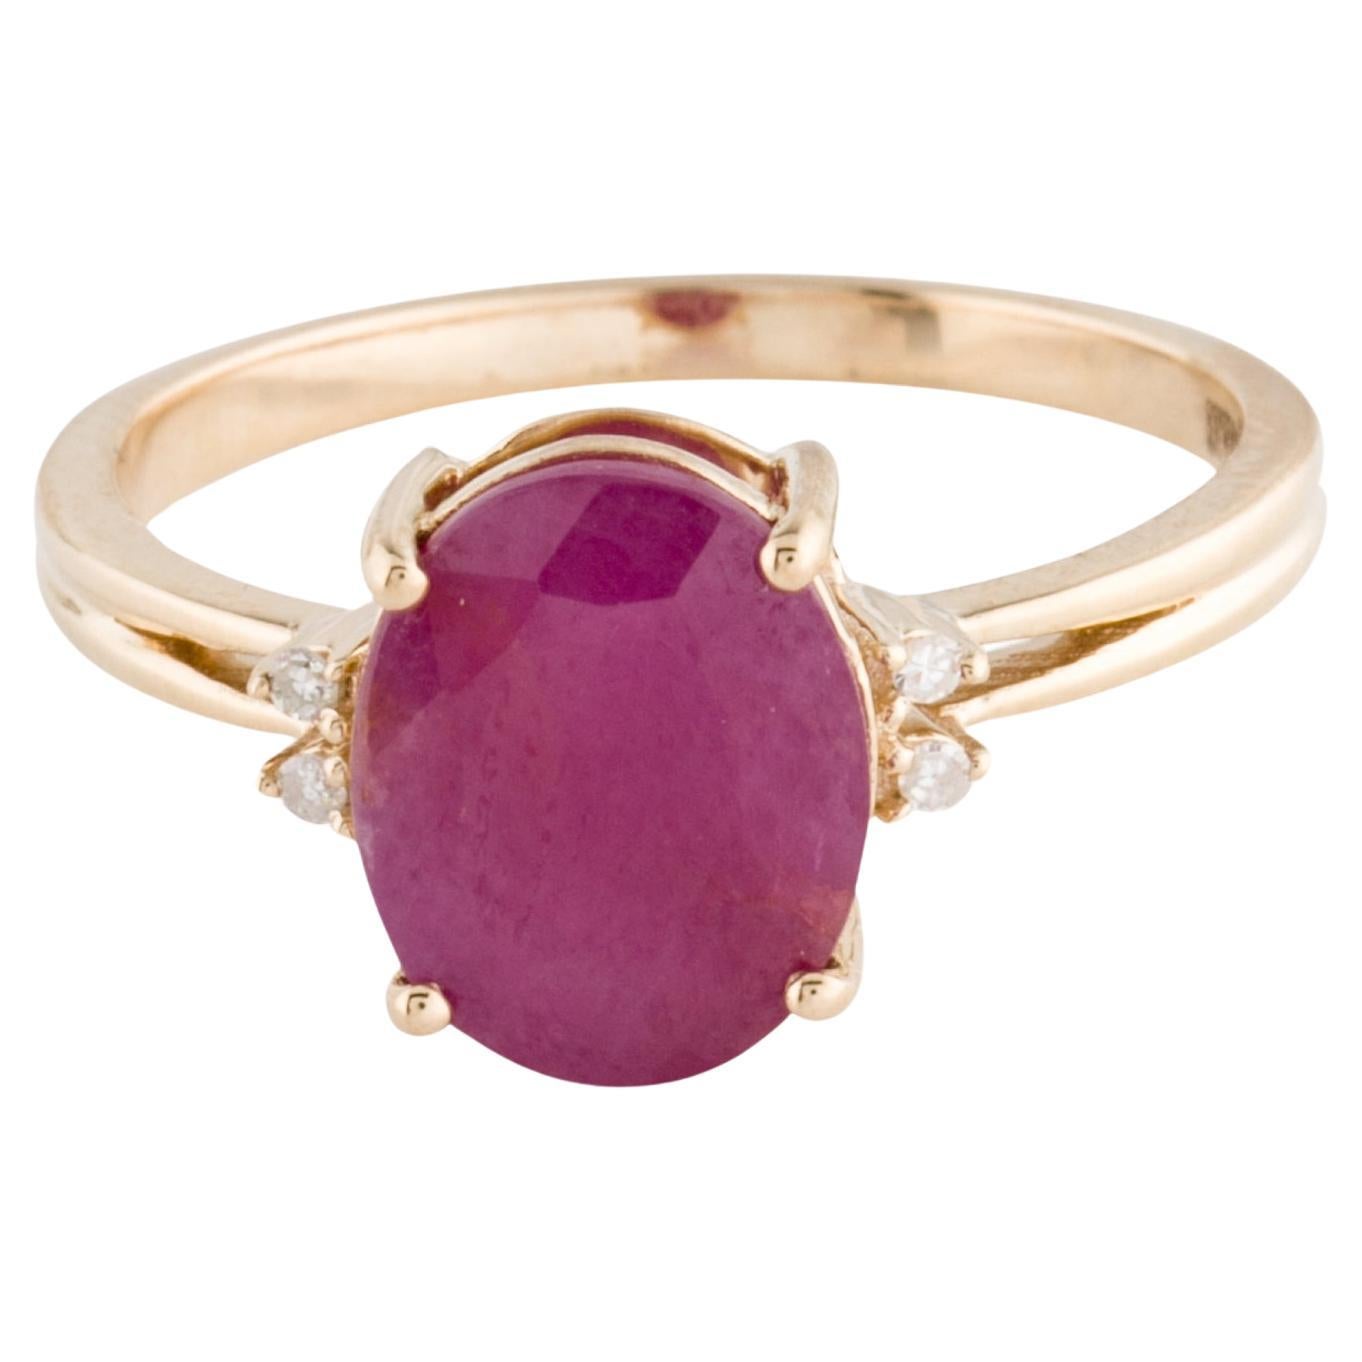 Dazzling 14K Gold 2.68ct Ruby & Diamond Cocktail Ring - Size 7 - Fine Gemstone For Sale